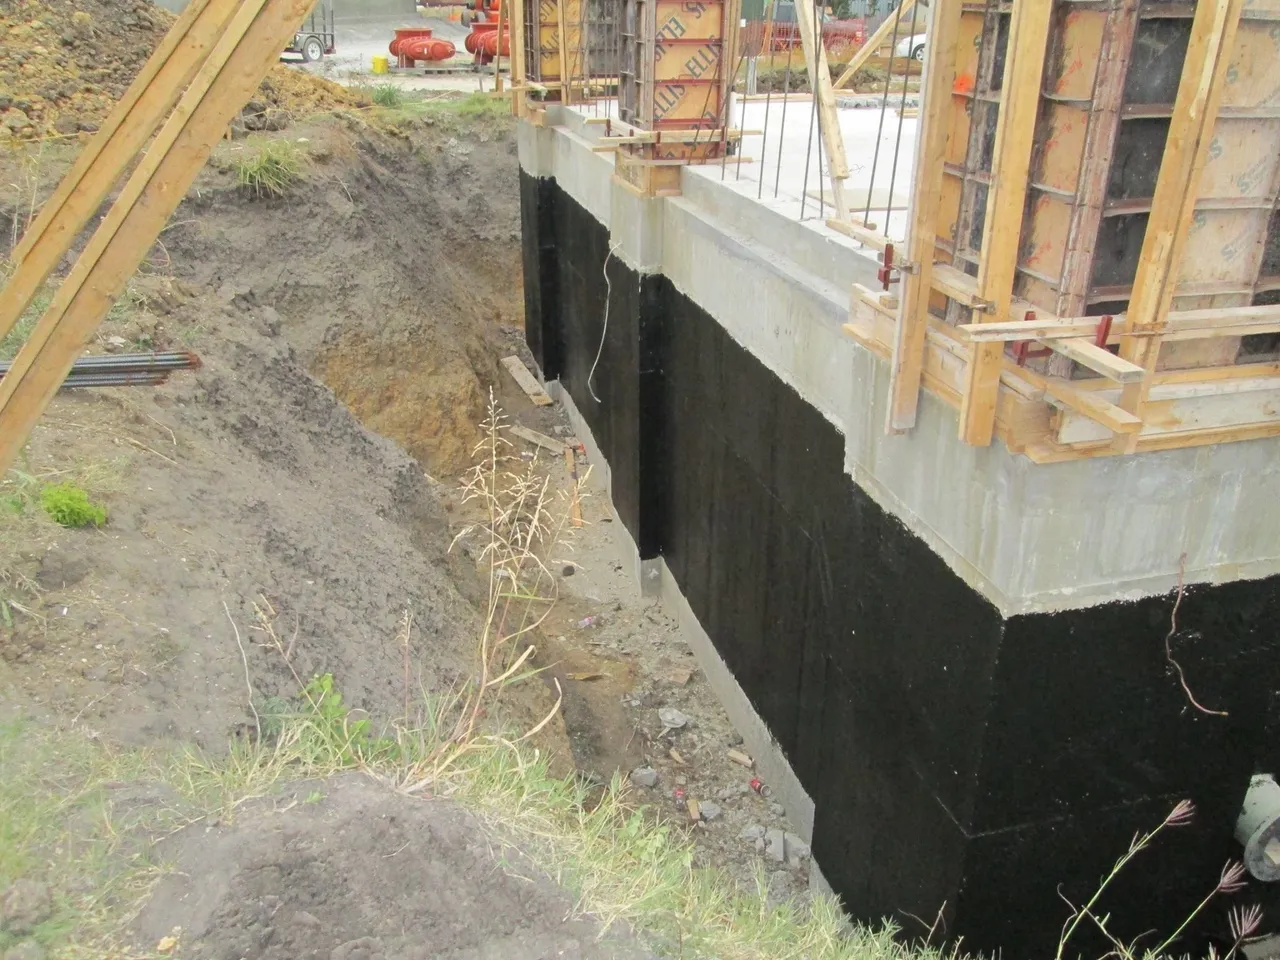 A close up of the foundation wall with black waterproofing.